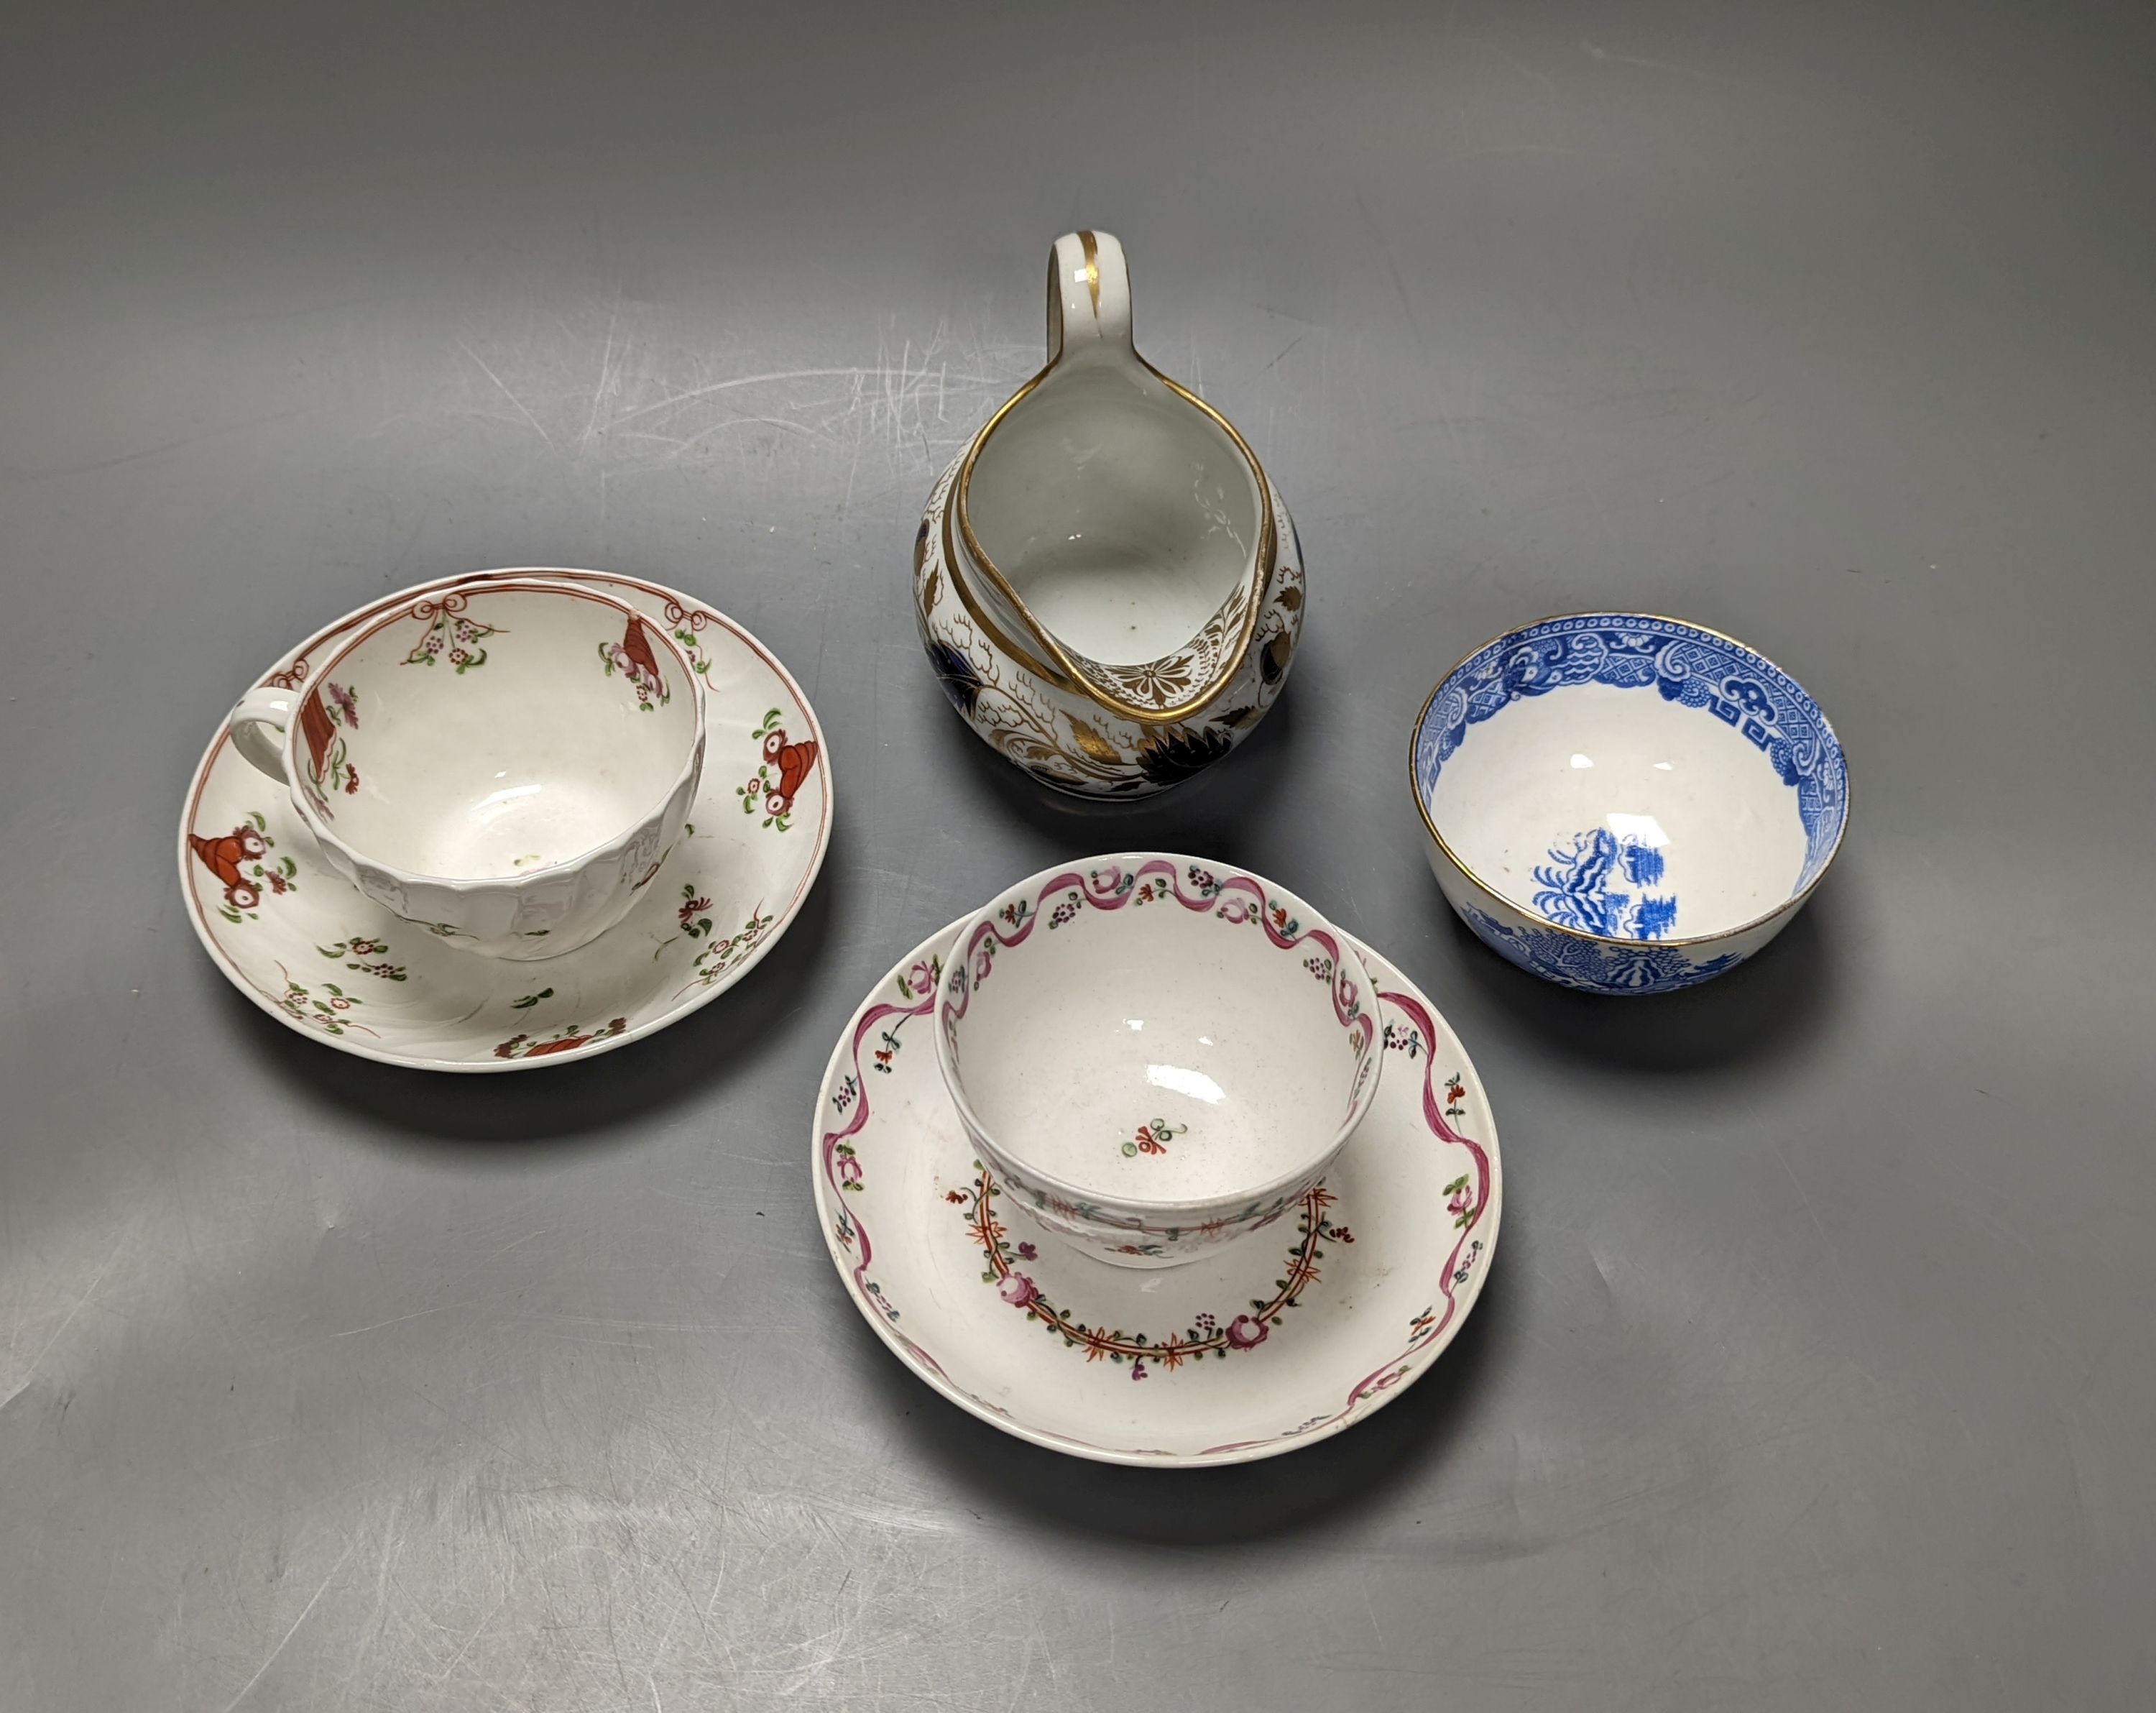 New Hall style study collection: a cream jug pattern 524, a teabowl and saucer with oriental figures, and another teabowl and saucer, a shankered teacup and saucer, two coffee cups, three teabowls, four saucers and a slo